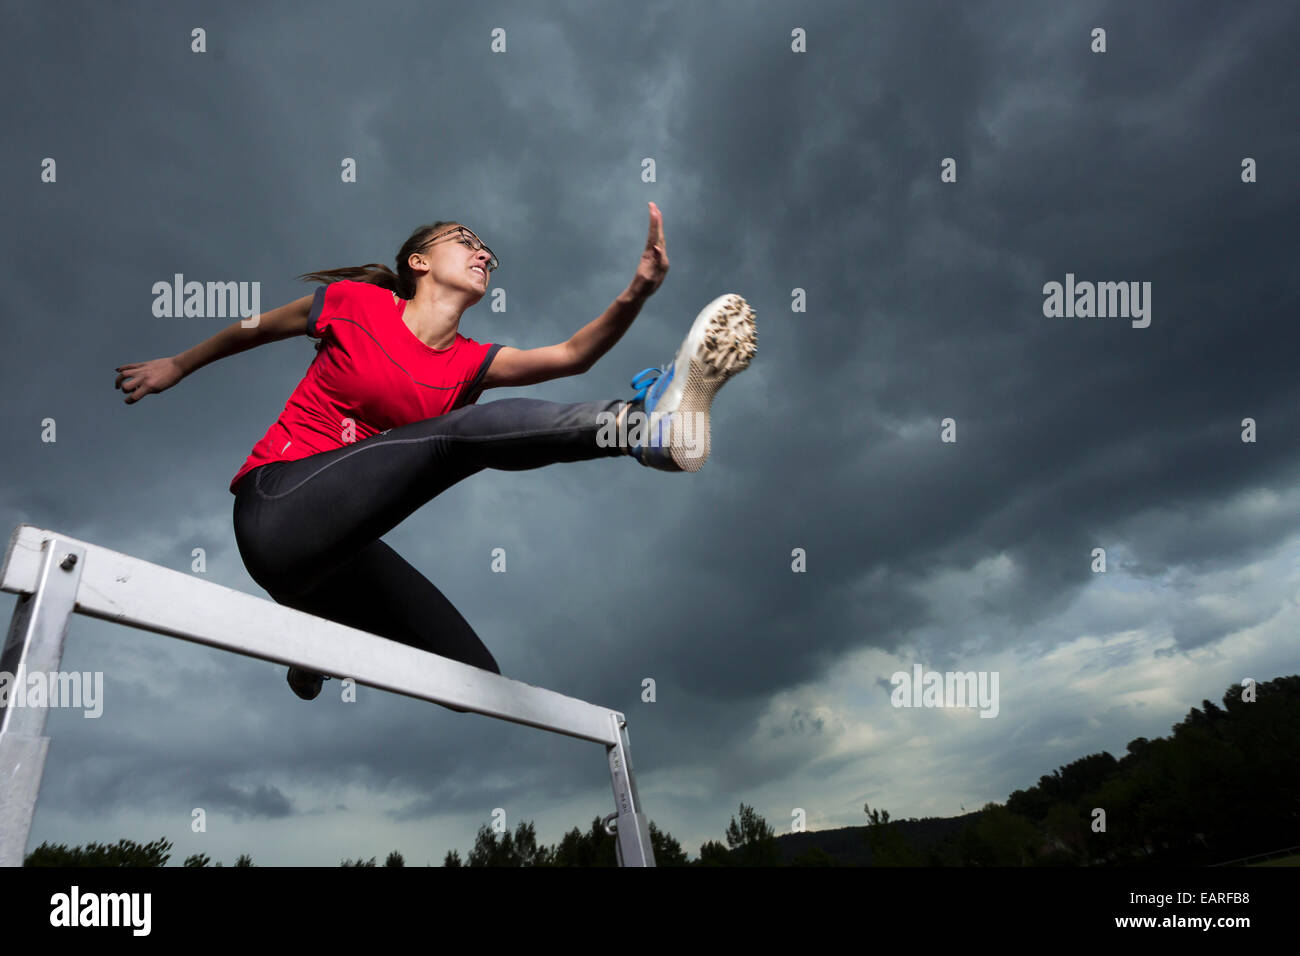 Athlete, 20 years, jumping hurdles, Winterbach, Baden-Württemberg, Germany Stock Photo